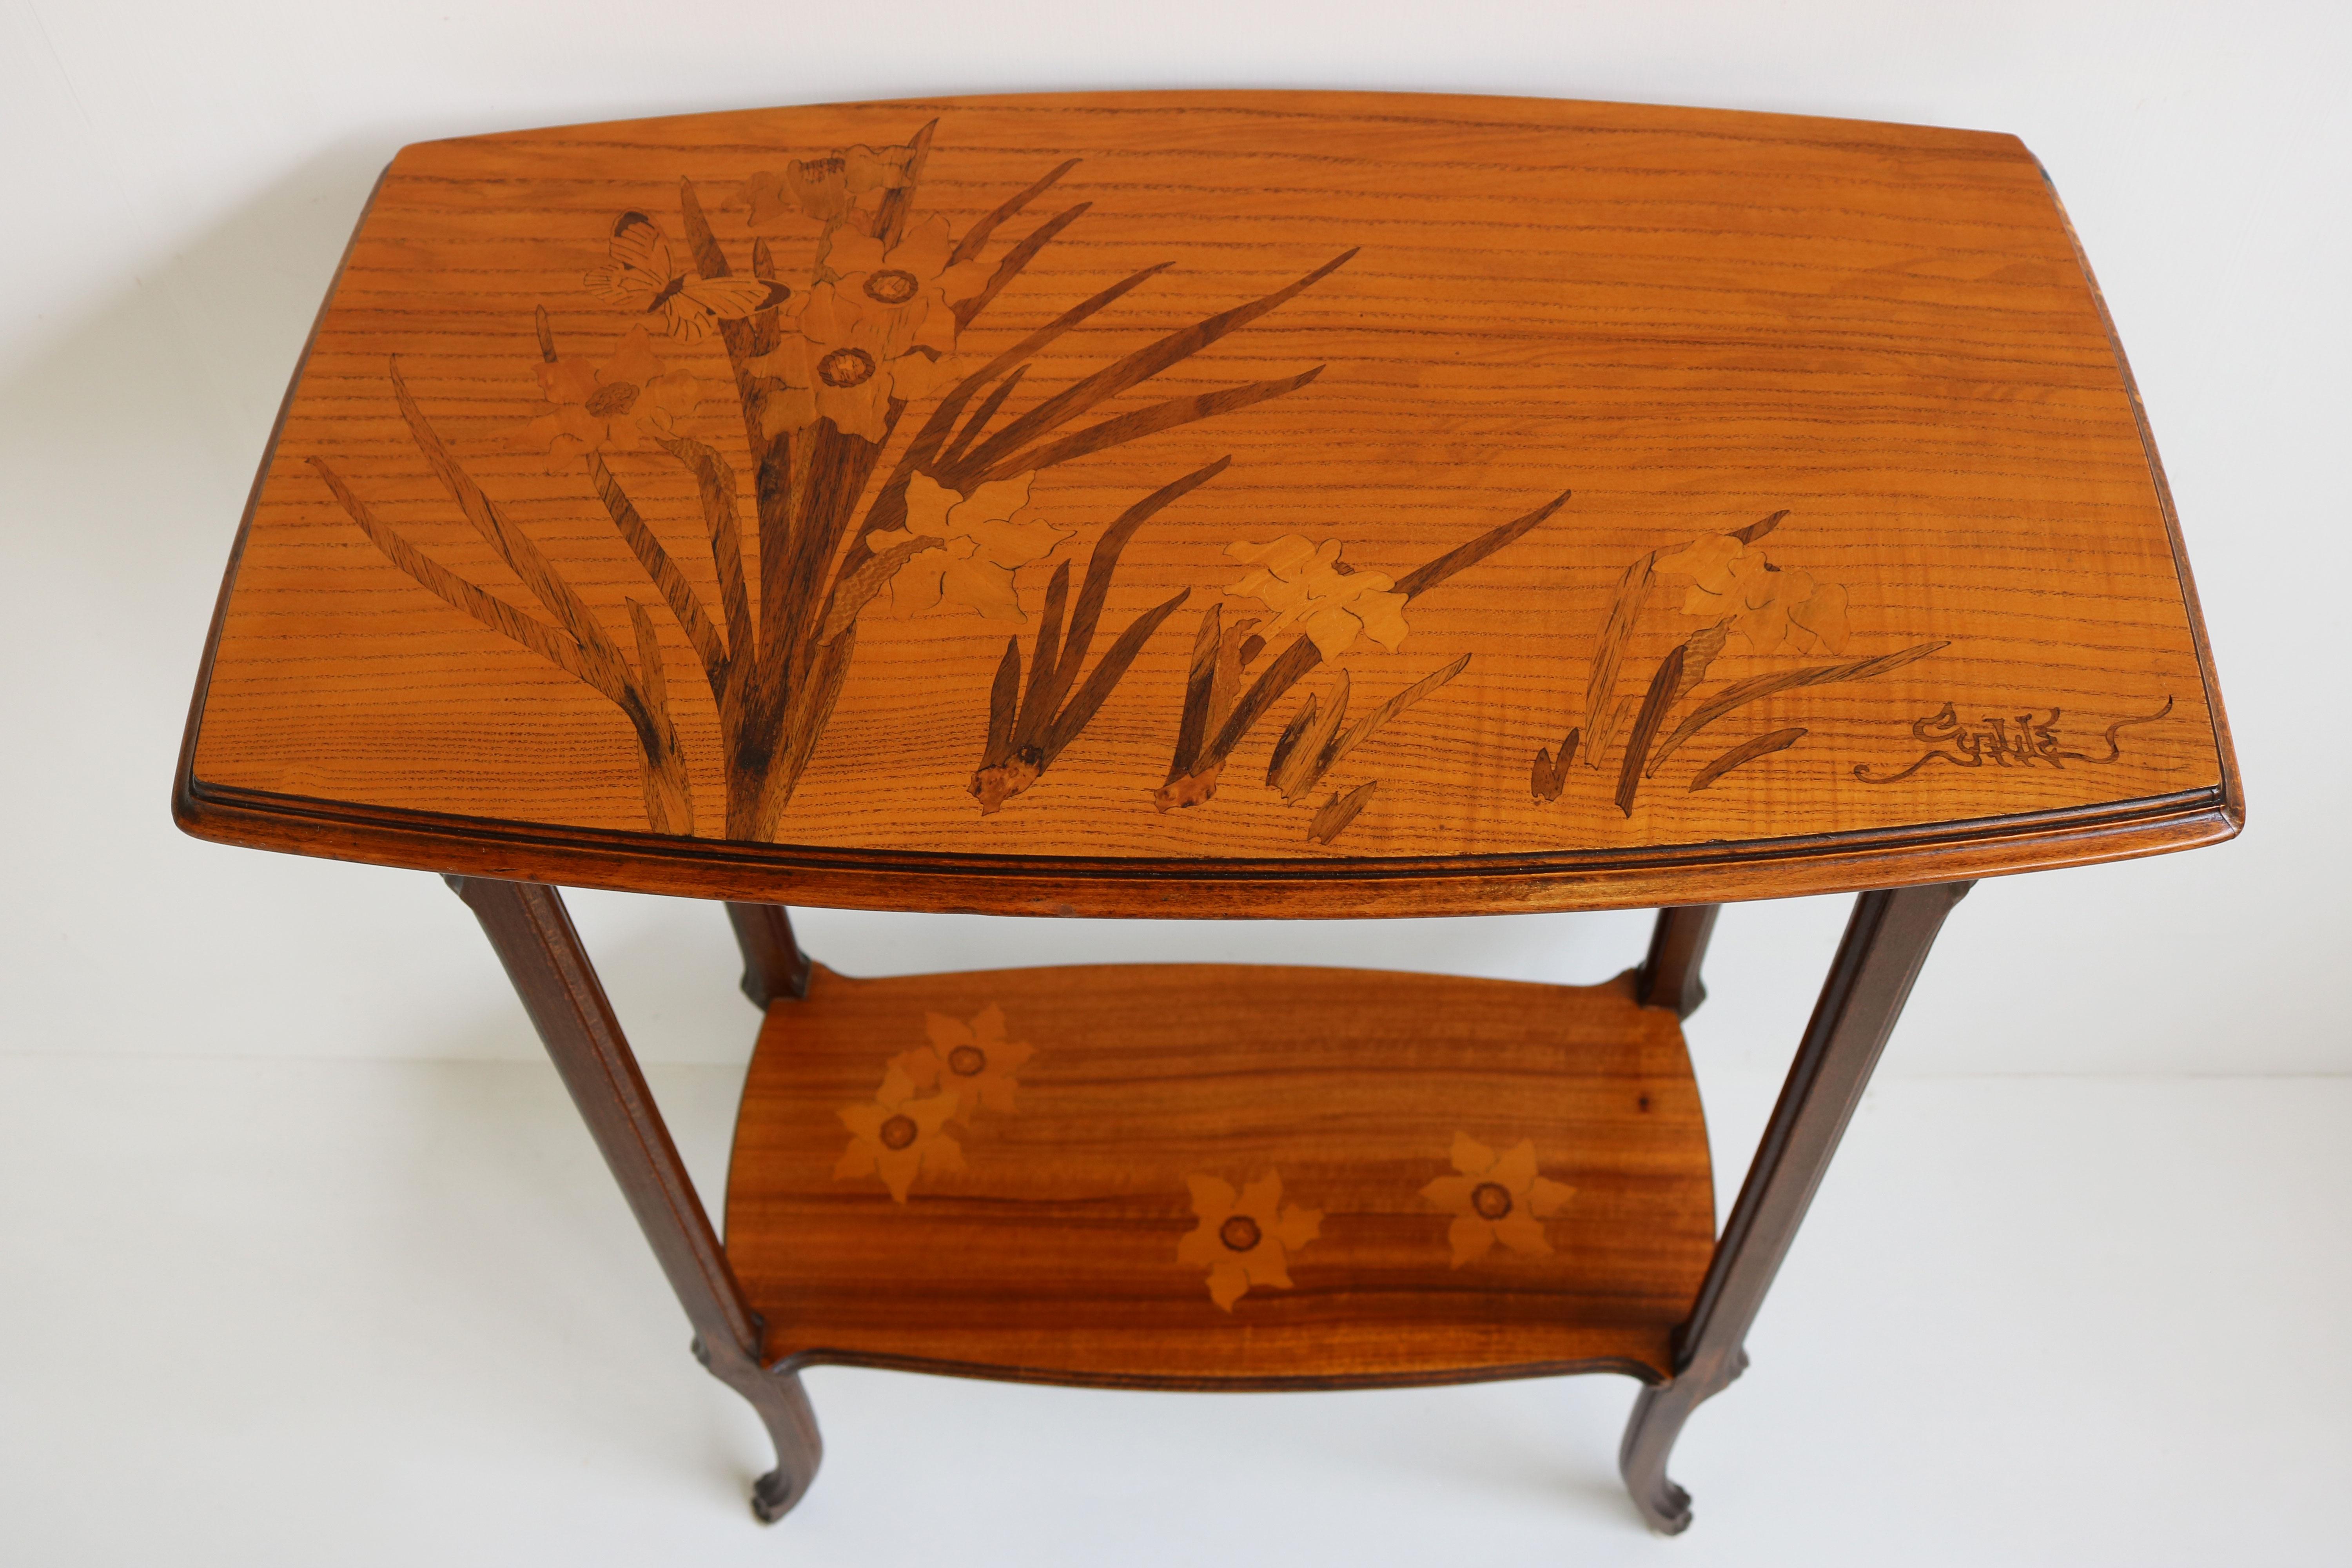 Exquisite French antique Art Nouveau side table by world famous Emile Gallé made in 1900 , singed on top. Fully original antique.
Marvelous art nouveau shaped frame with 2 inlay shelves the top consists of various flowers & a stunning butterfly.